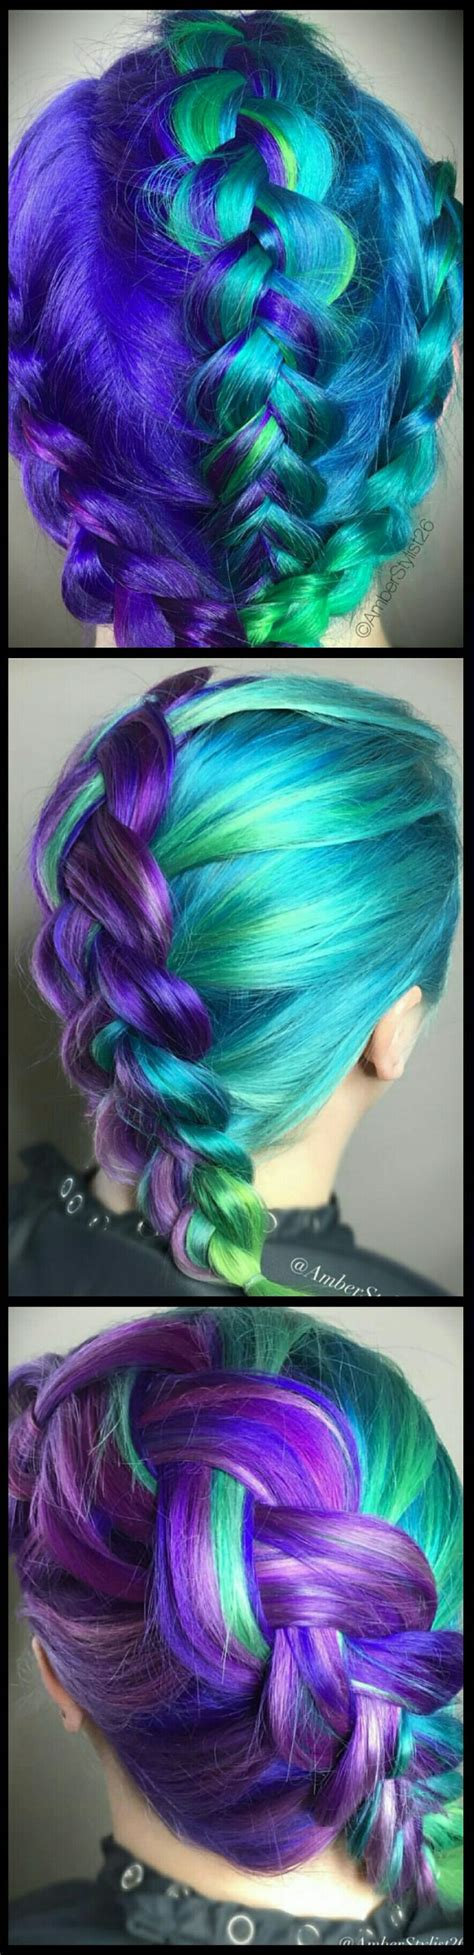 1538 Best Images About Colorful Hair On Pinterest Teal